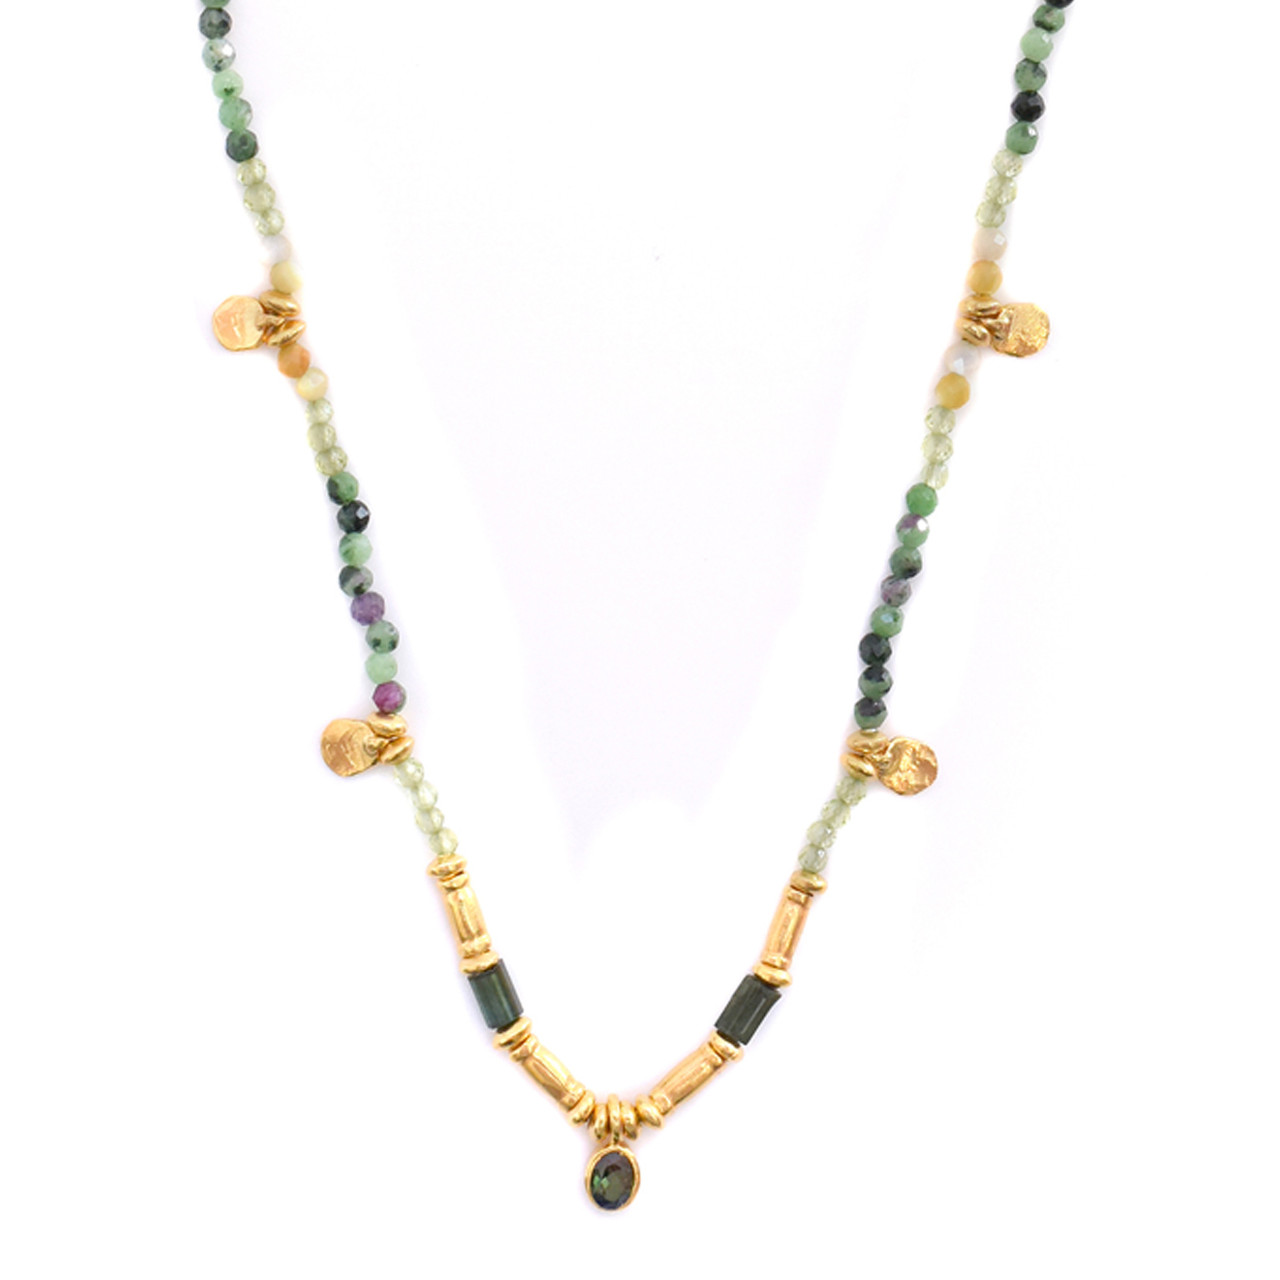 Smarties Gold Plated Beaded Necklace with Zoisite, Peridot & Agate, Mary Gaitani, tomfoolery